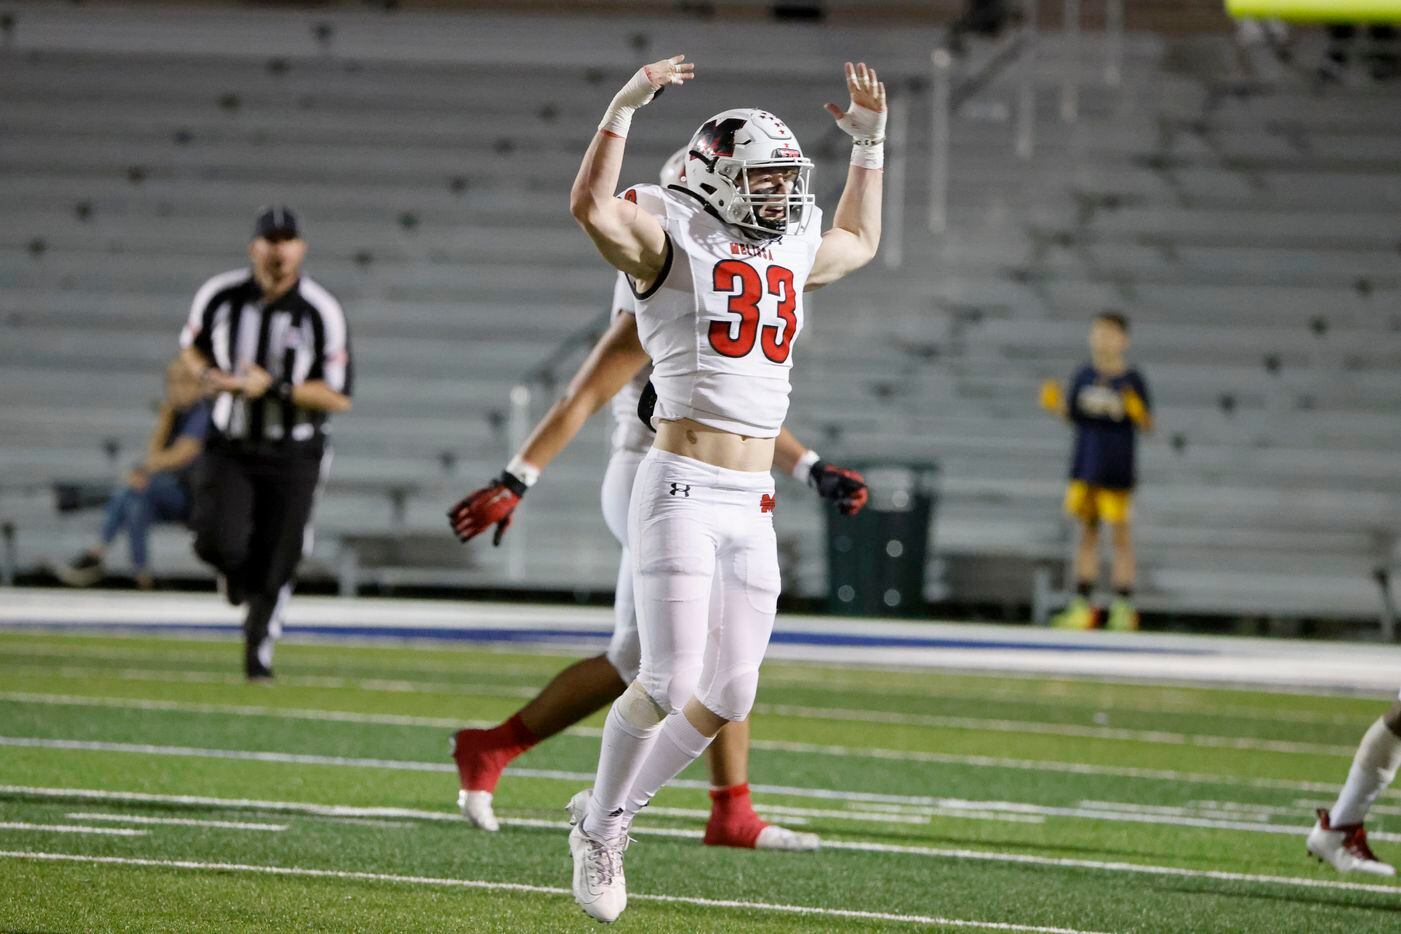 Melissa linebacker Jayson Cave (33) celebrates as they got the ball on downs from Stephenville during the first half of a Class 4A Division I Region II final high school football game in Bedford, Texas on Friday, Dec. 3, 2021. (Michael Ainsworth/Special Contributor)